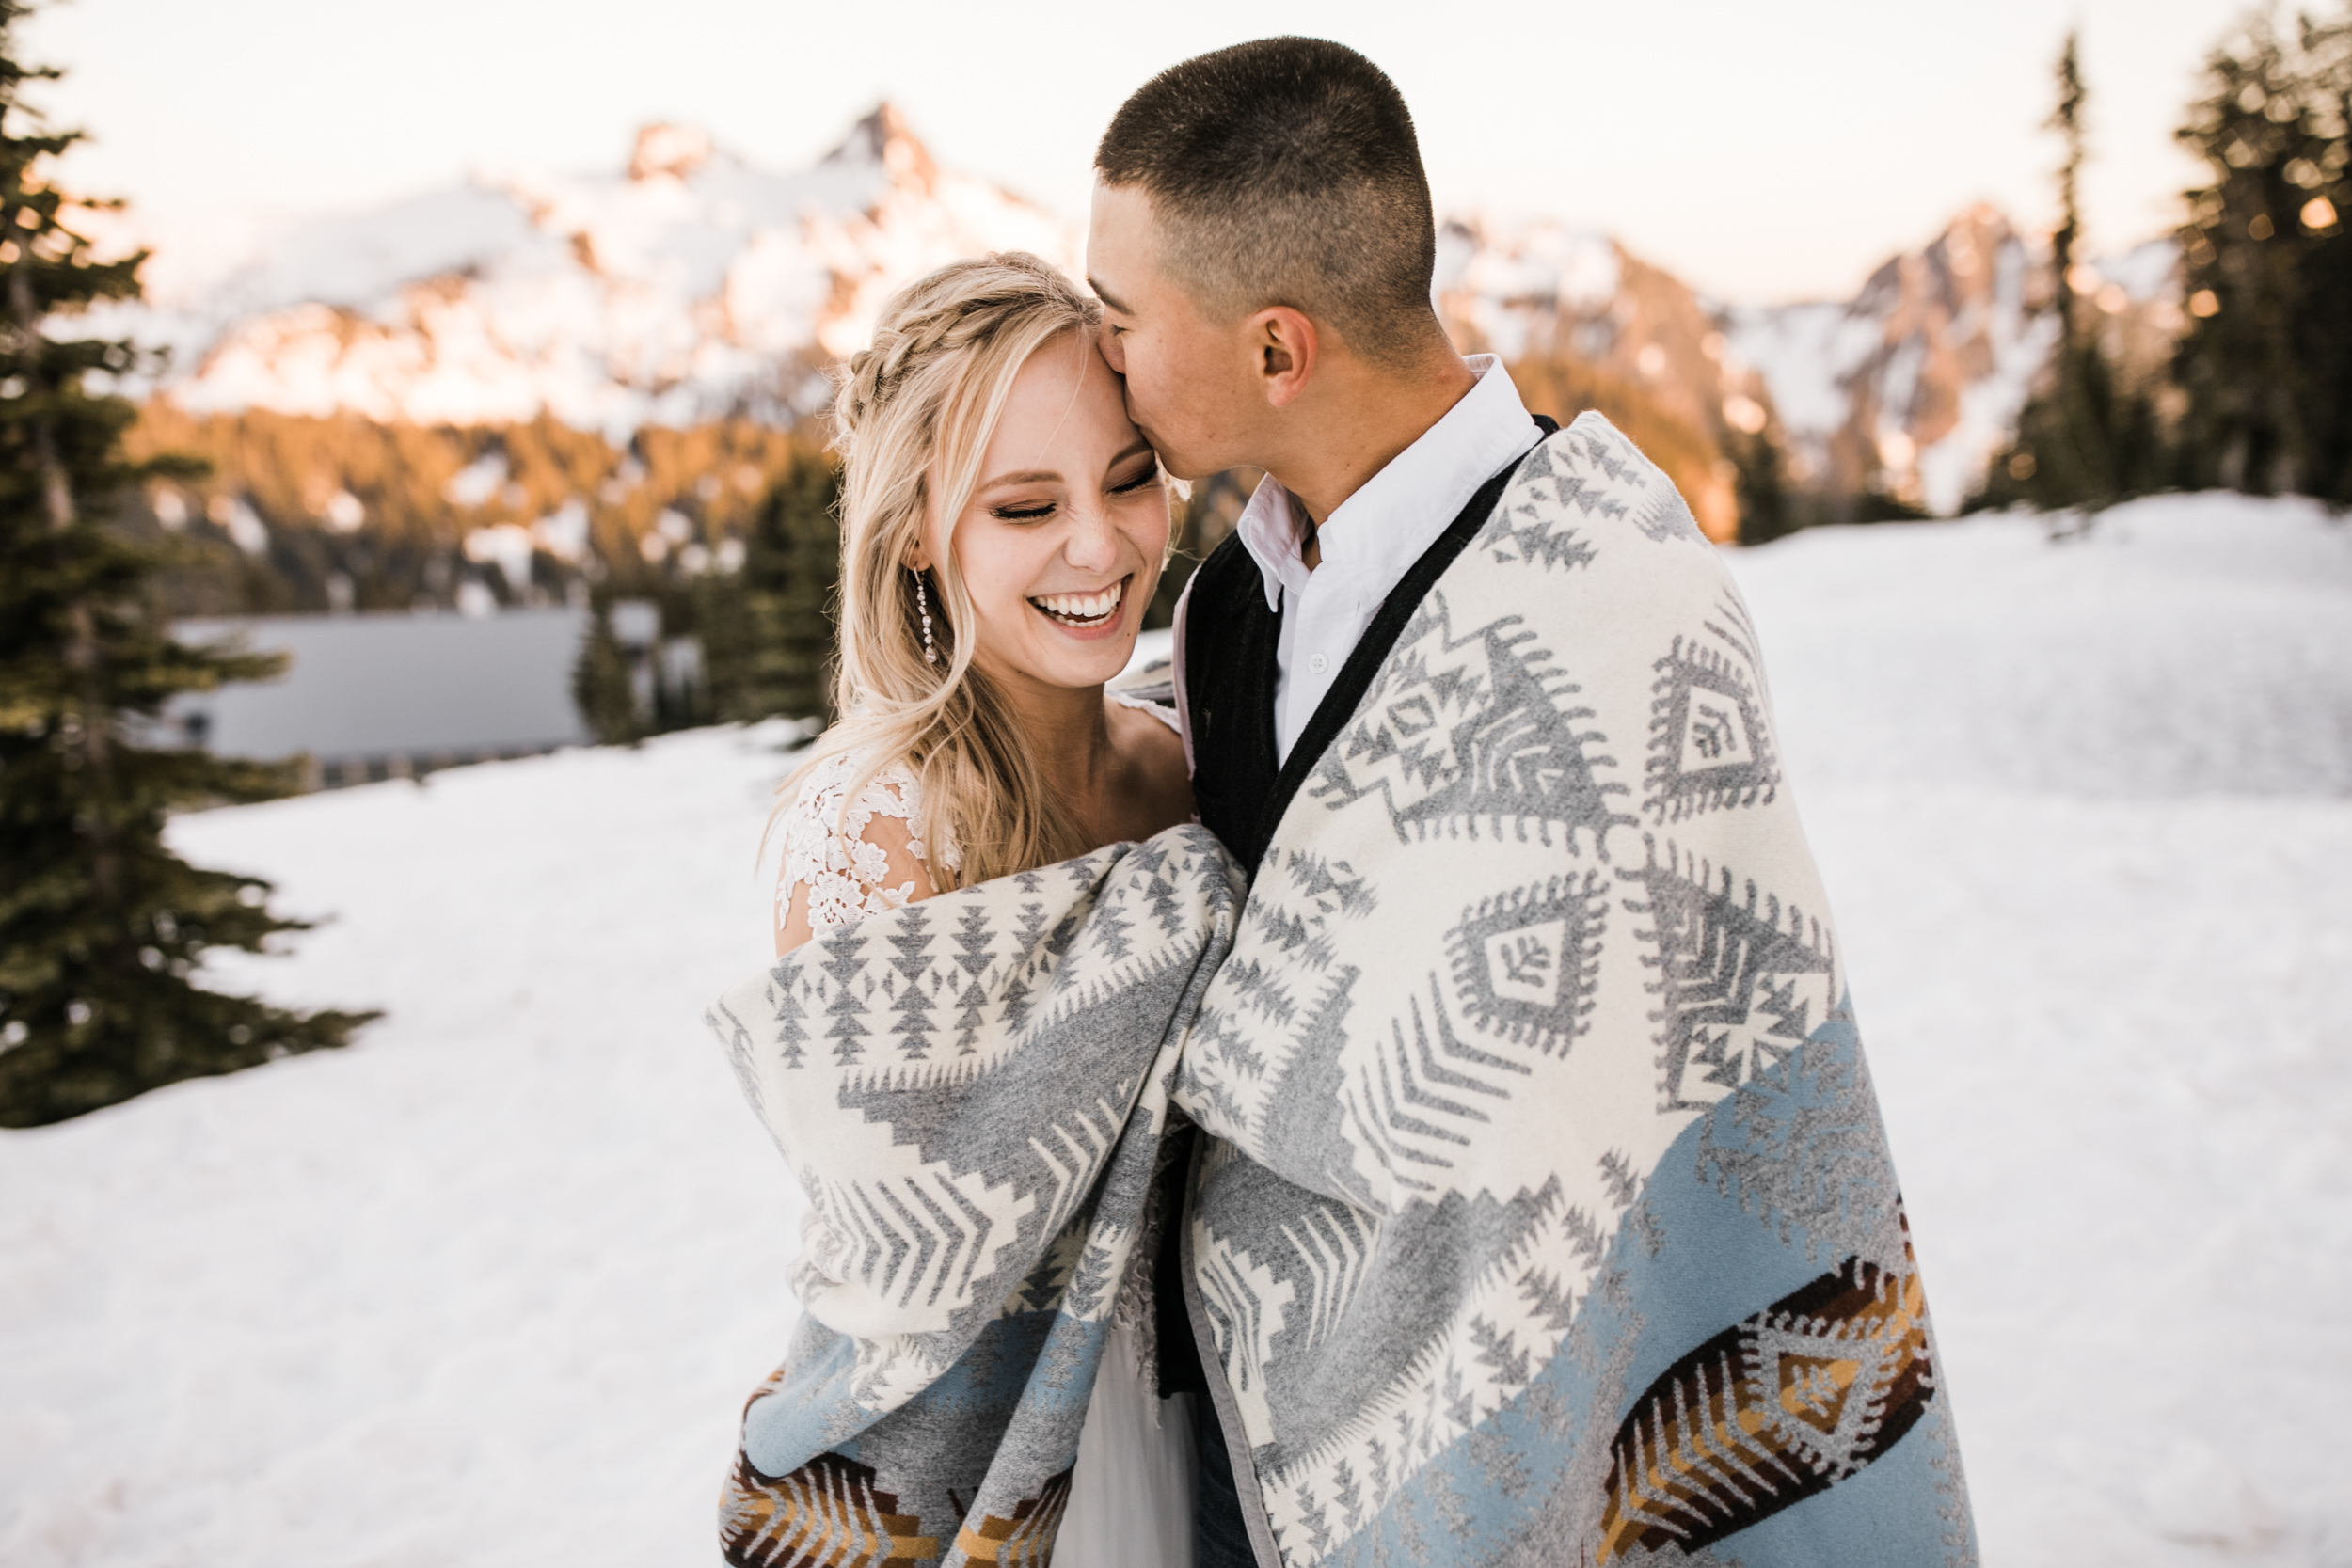 snowy wedding | long sleeve wedding dress | pendleton silver bark wedding blanket | wedding portraits in the snow in mount rainier | first dance in the mountains | national park elopement photographer